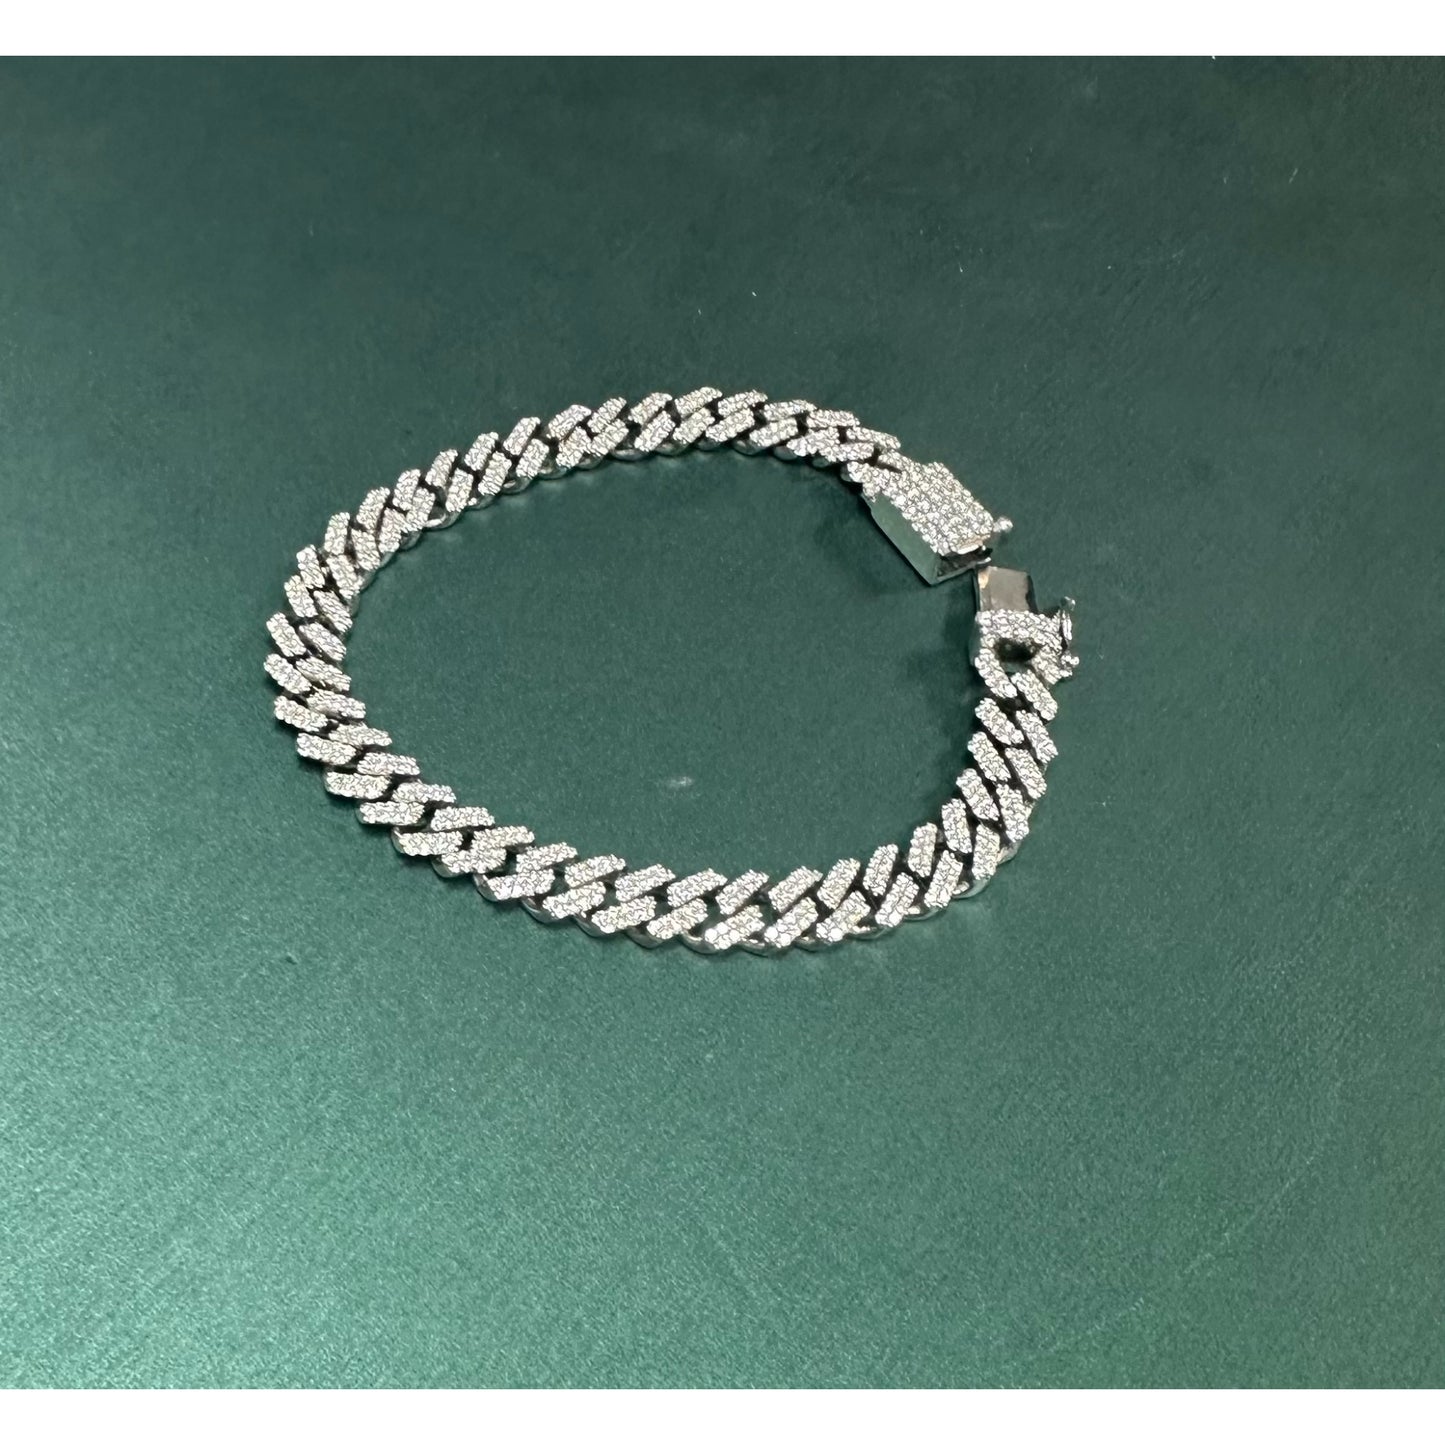 White gold cuban link z link style